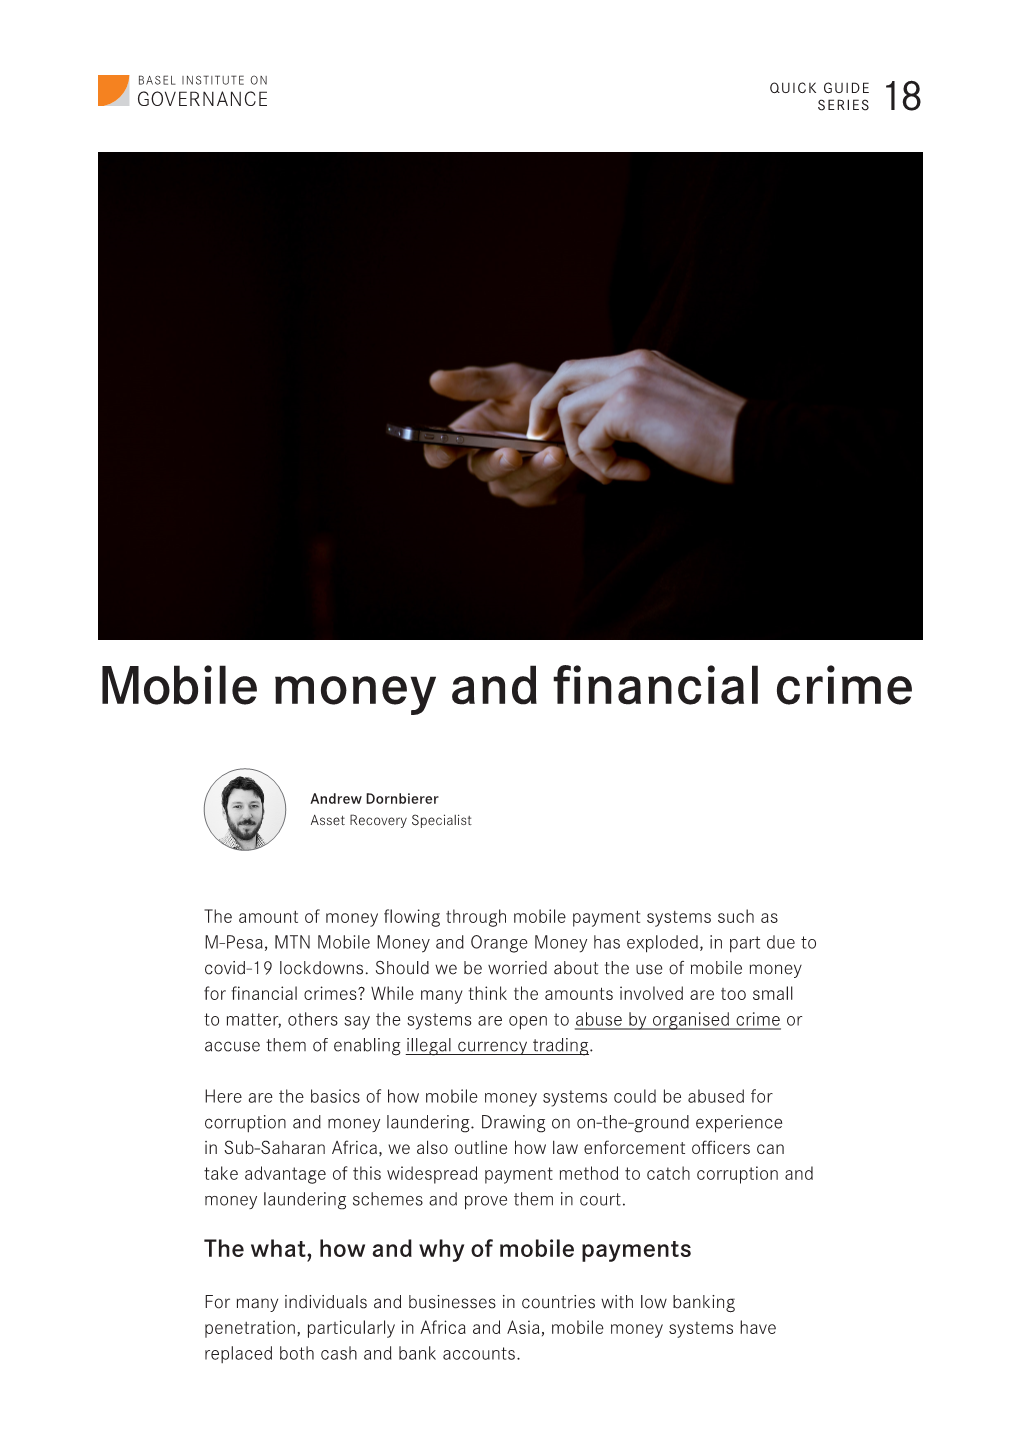 Mobile Money and Financial Crime